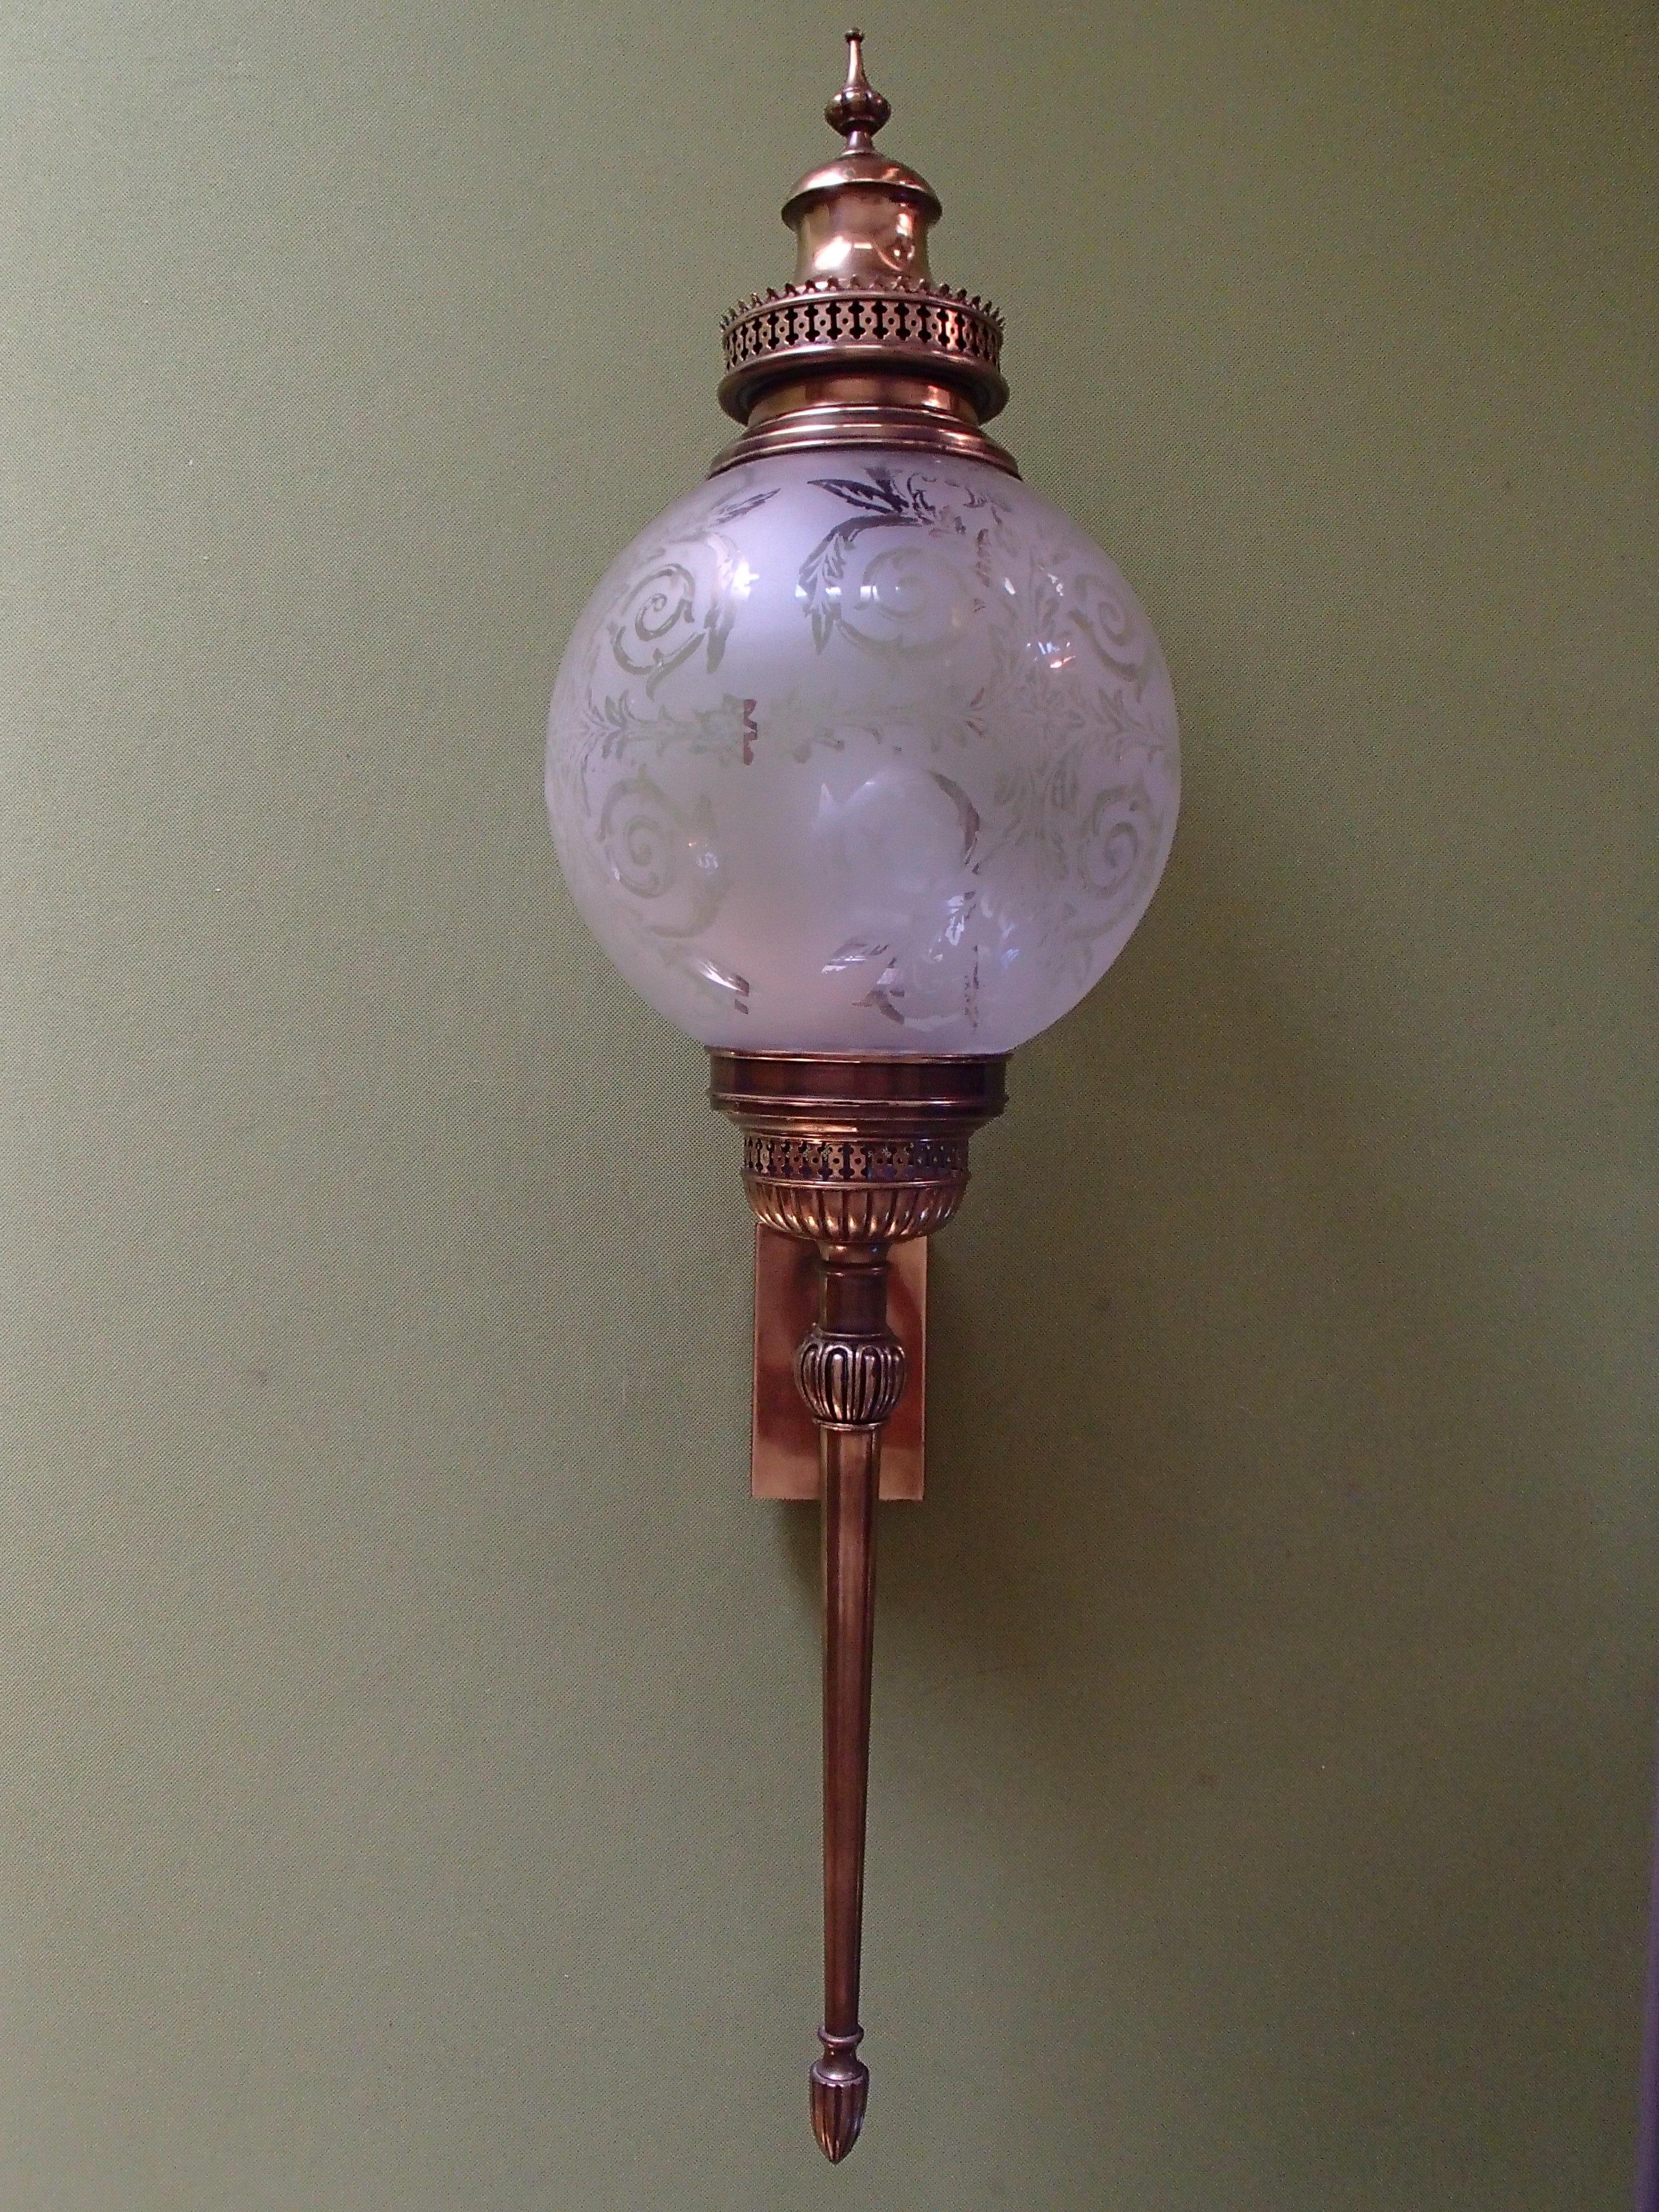 Hughe wall lights scones torches with round engraved glass and brass.